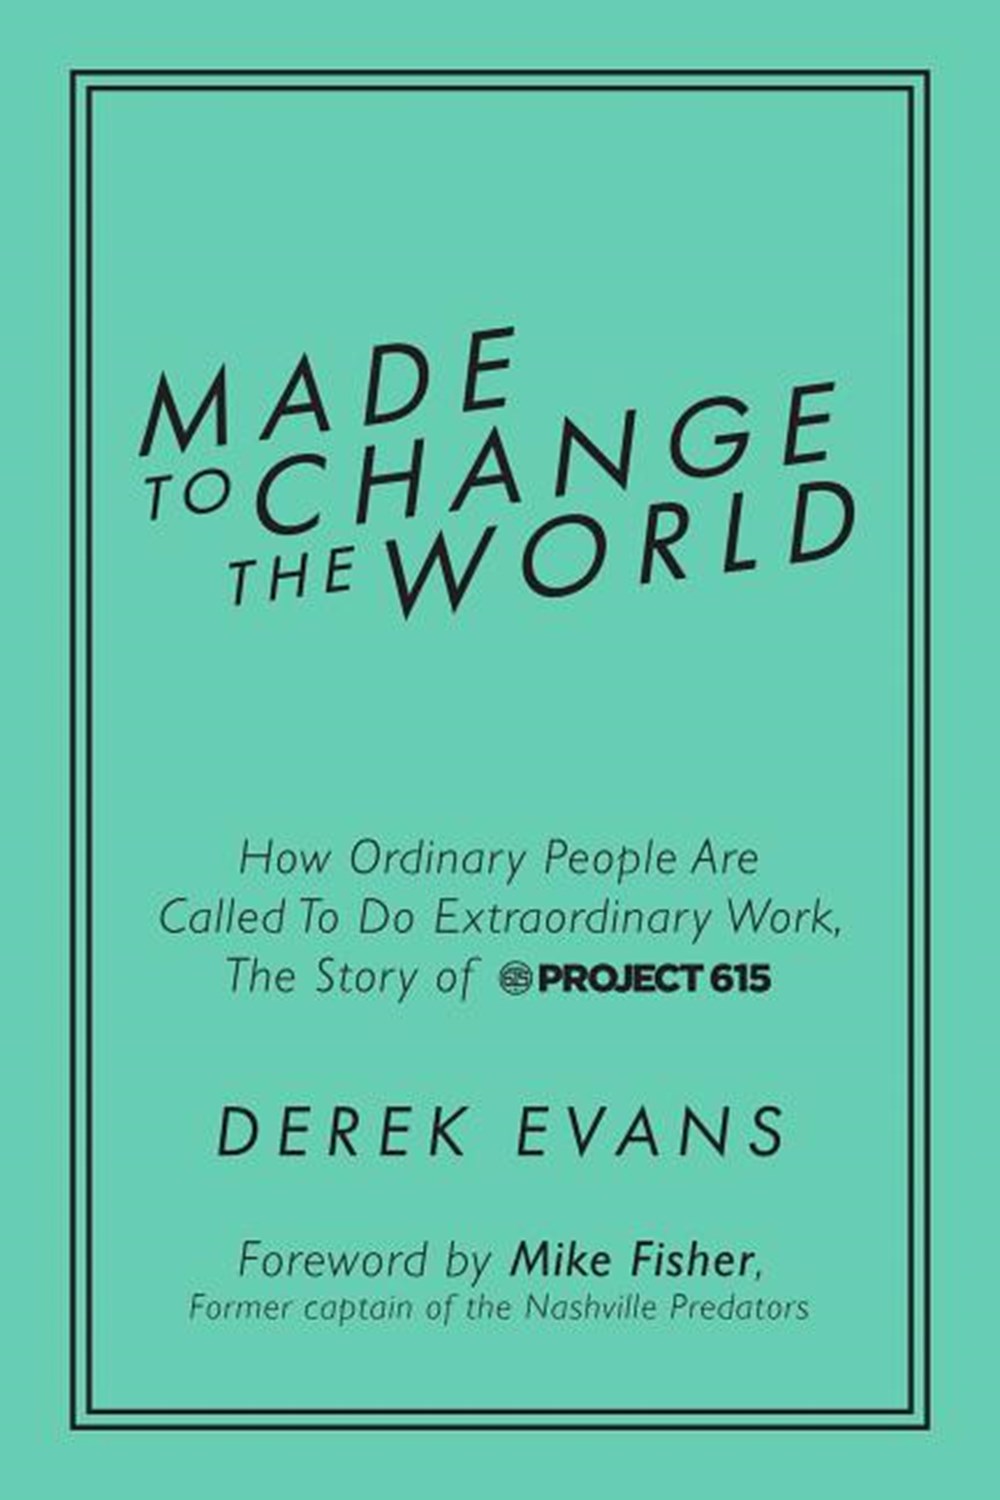 Made to Change the World: How Ordinary People Are Called to Do Extraordinary Work, the Story of Proj